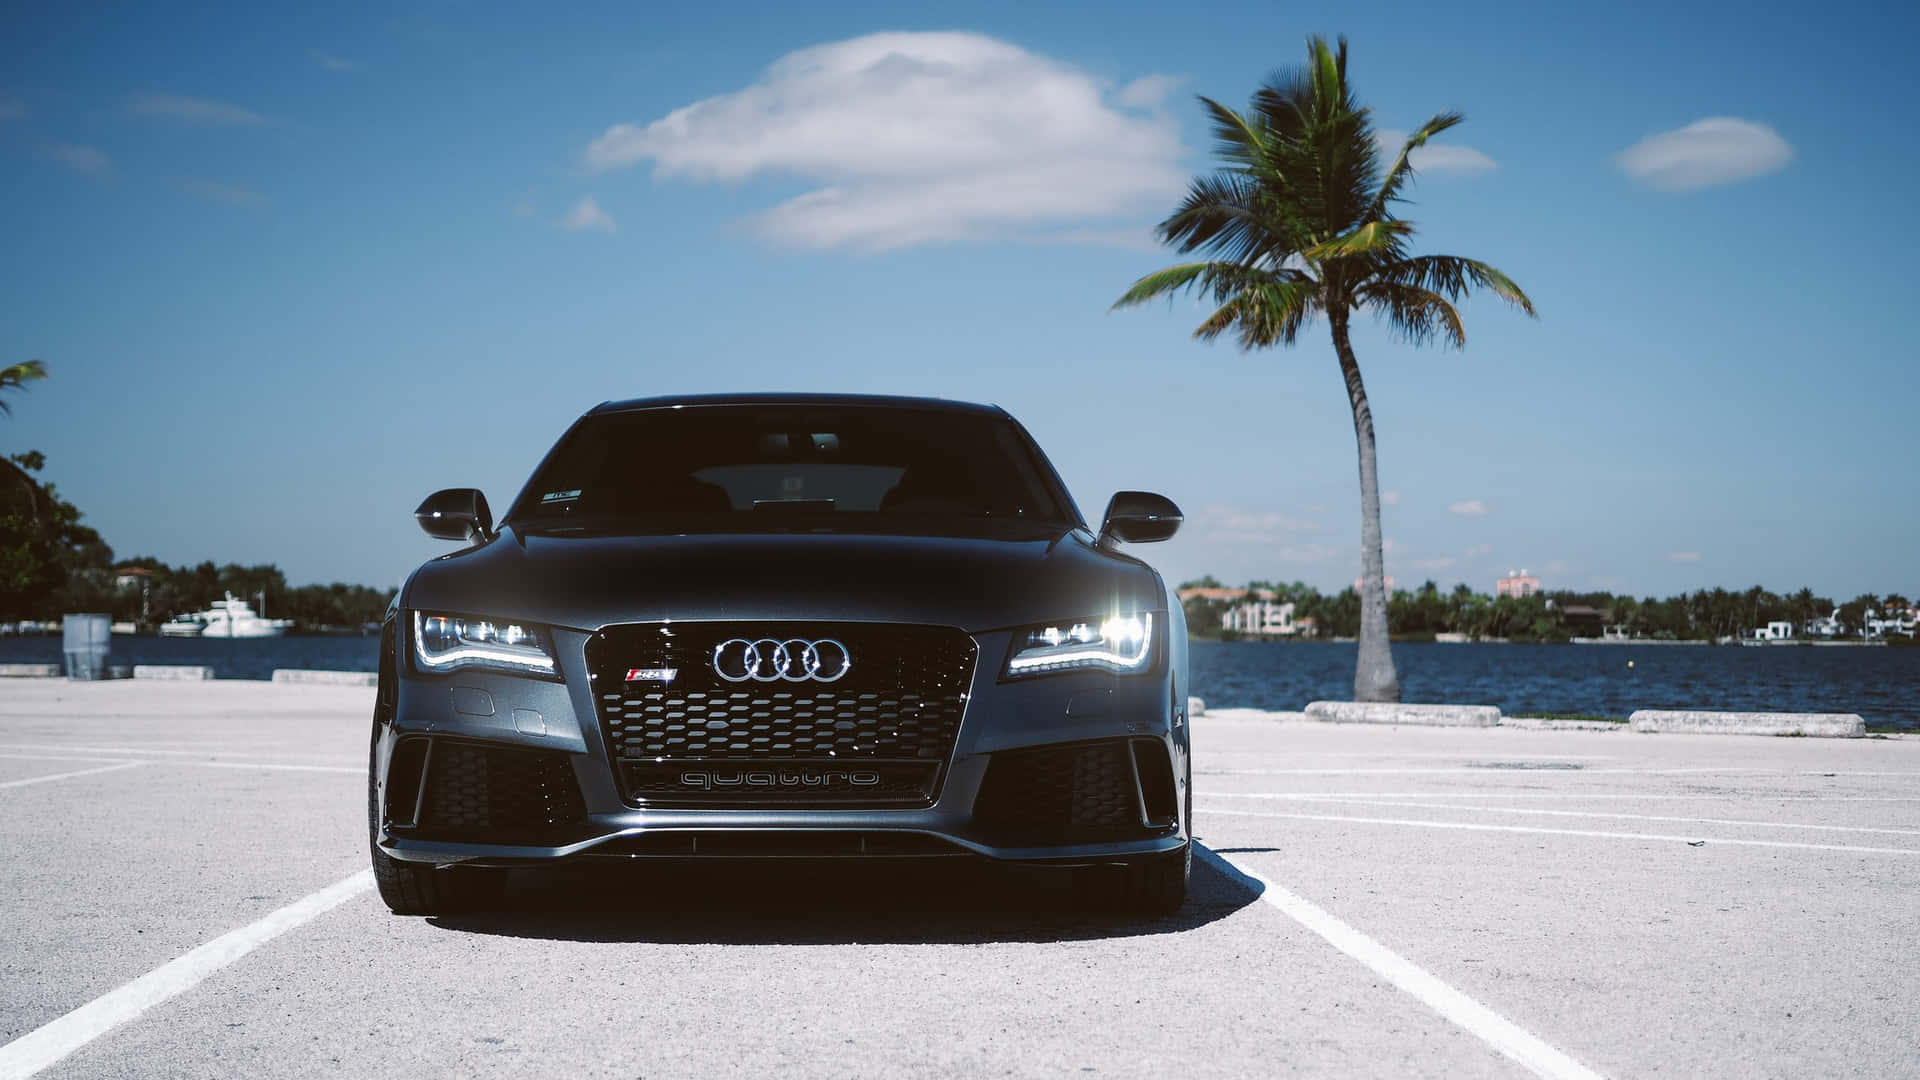 Sleek and powerful Audi sports car against a stunning backdrop.